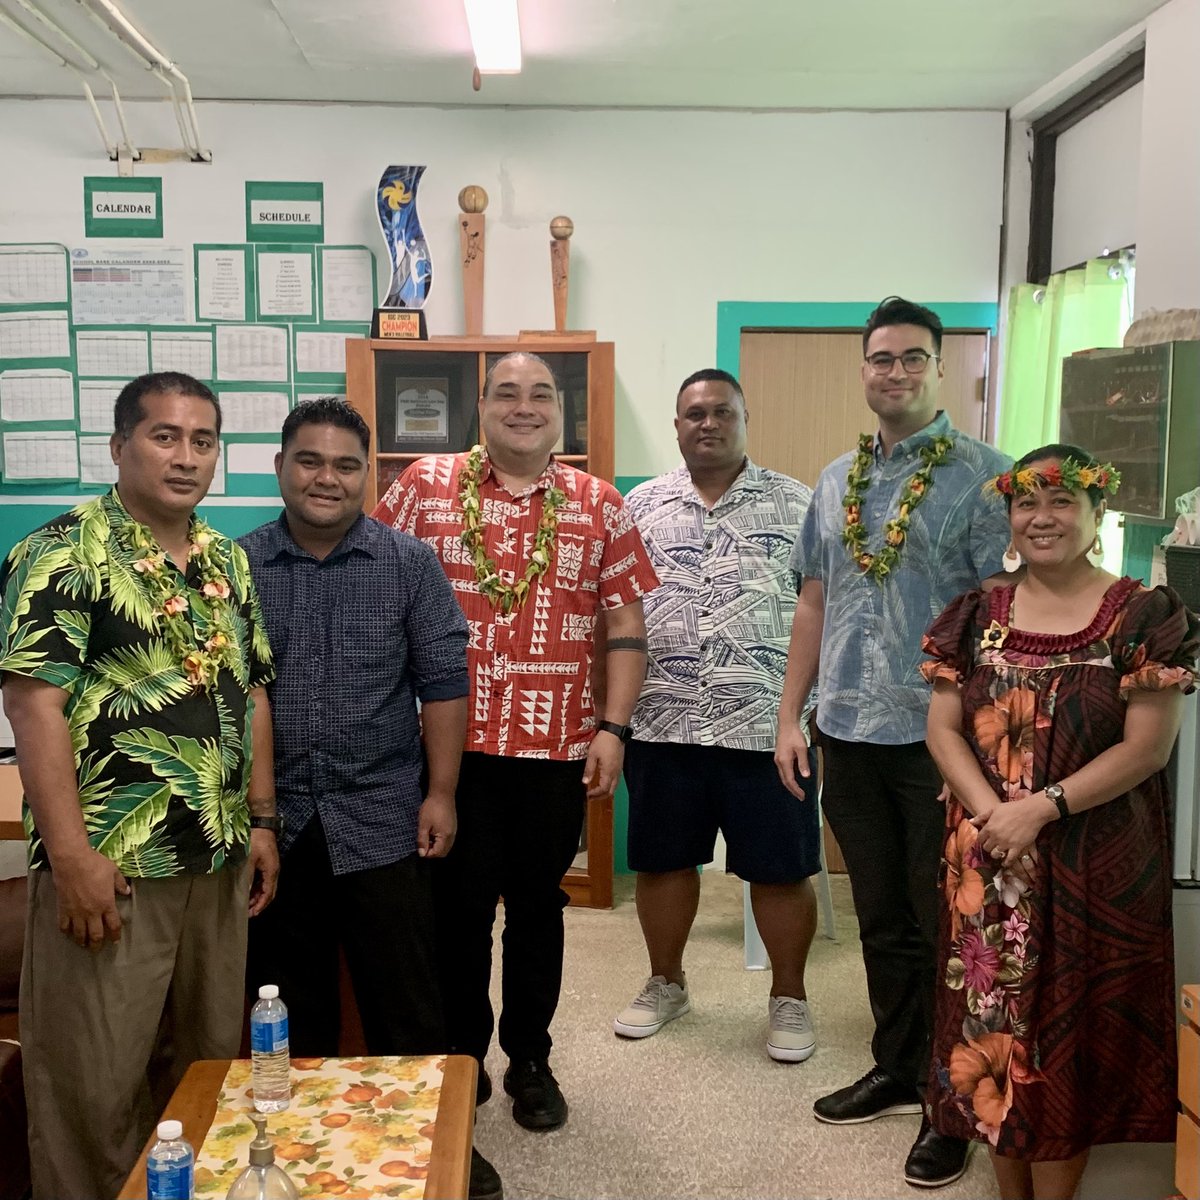 Had enlightening talks at #ChuukHighSchool and #BereaChristianSchool today! Discussed the value of the #PacificIslandsReport for students and teachers. Learn more at pireport.org. Thanks, FSM! Next stop, Guam!

#PIDPinTheRegion #PIReport #CapacityBuilding